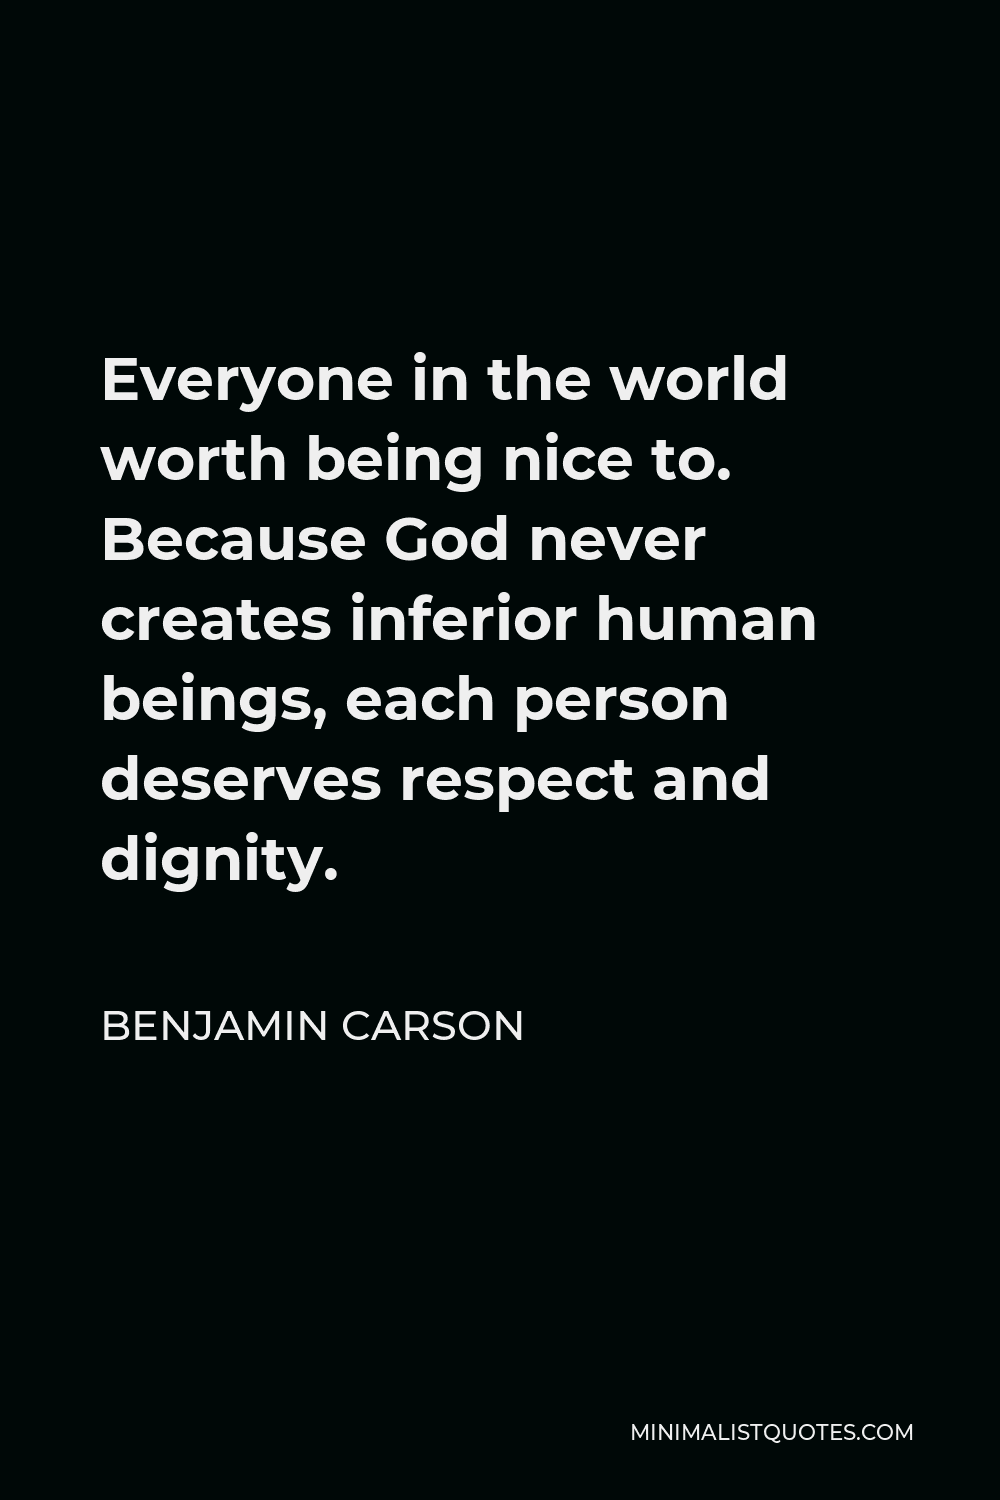 Benjamin Carson Quote - Everyone in the world worth being nice to. Because God never creates inferior human beings, each person deserves respect and dignity.